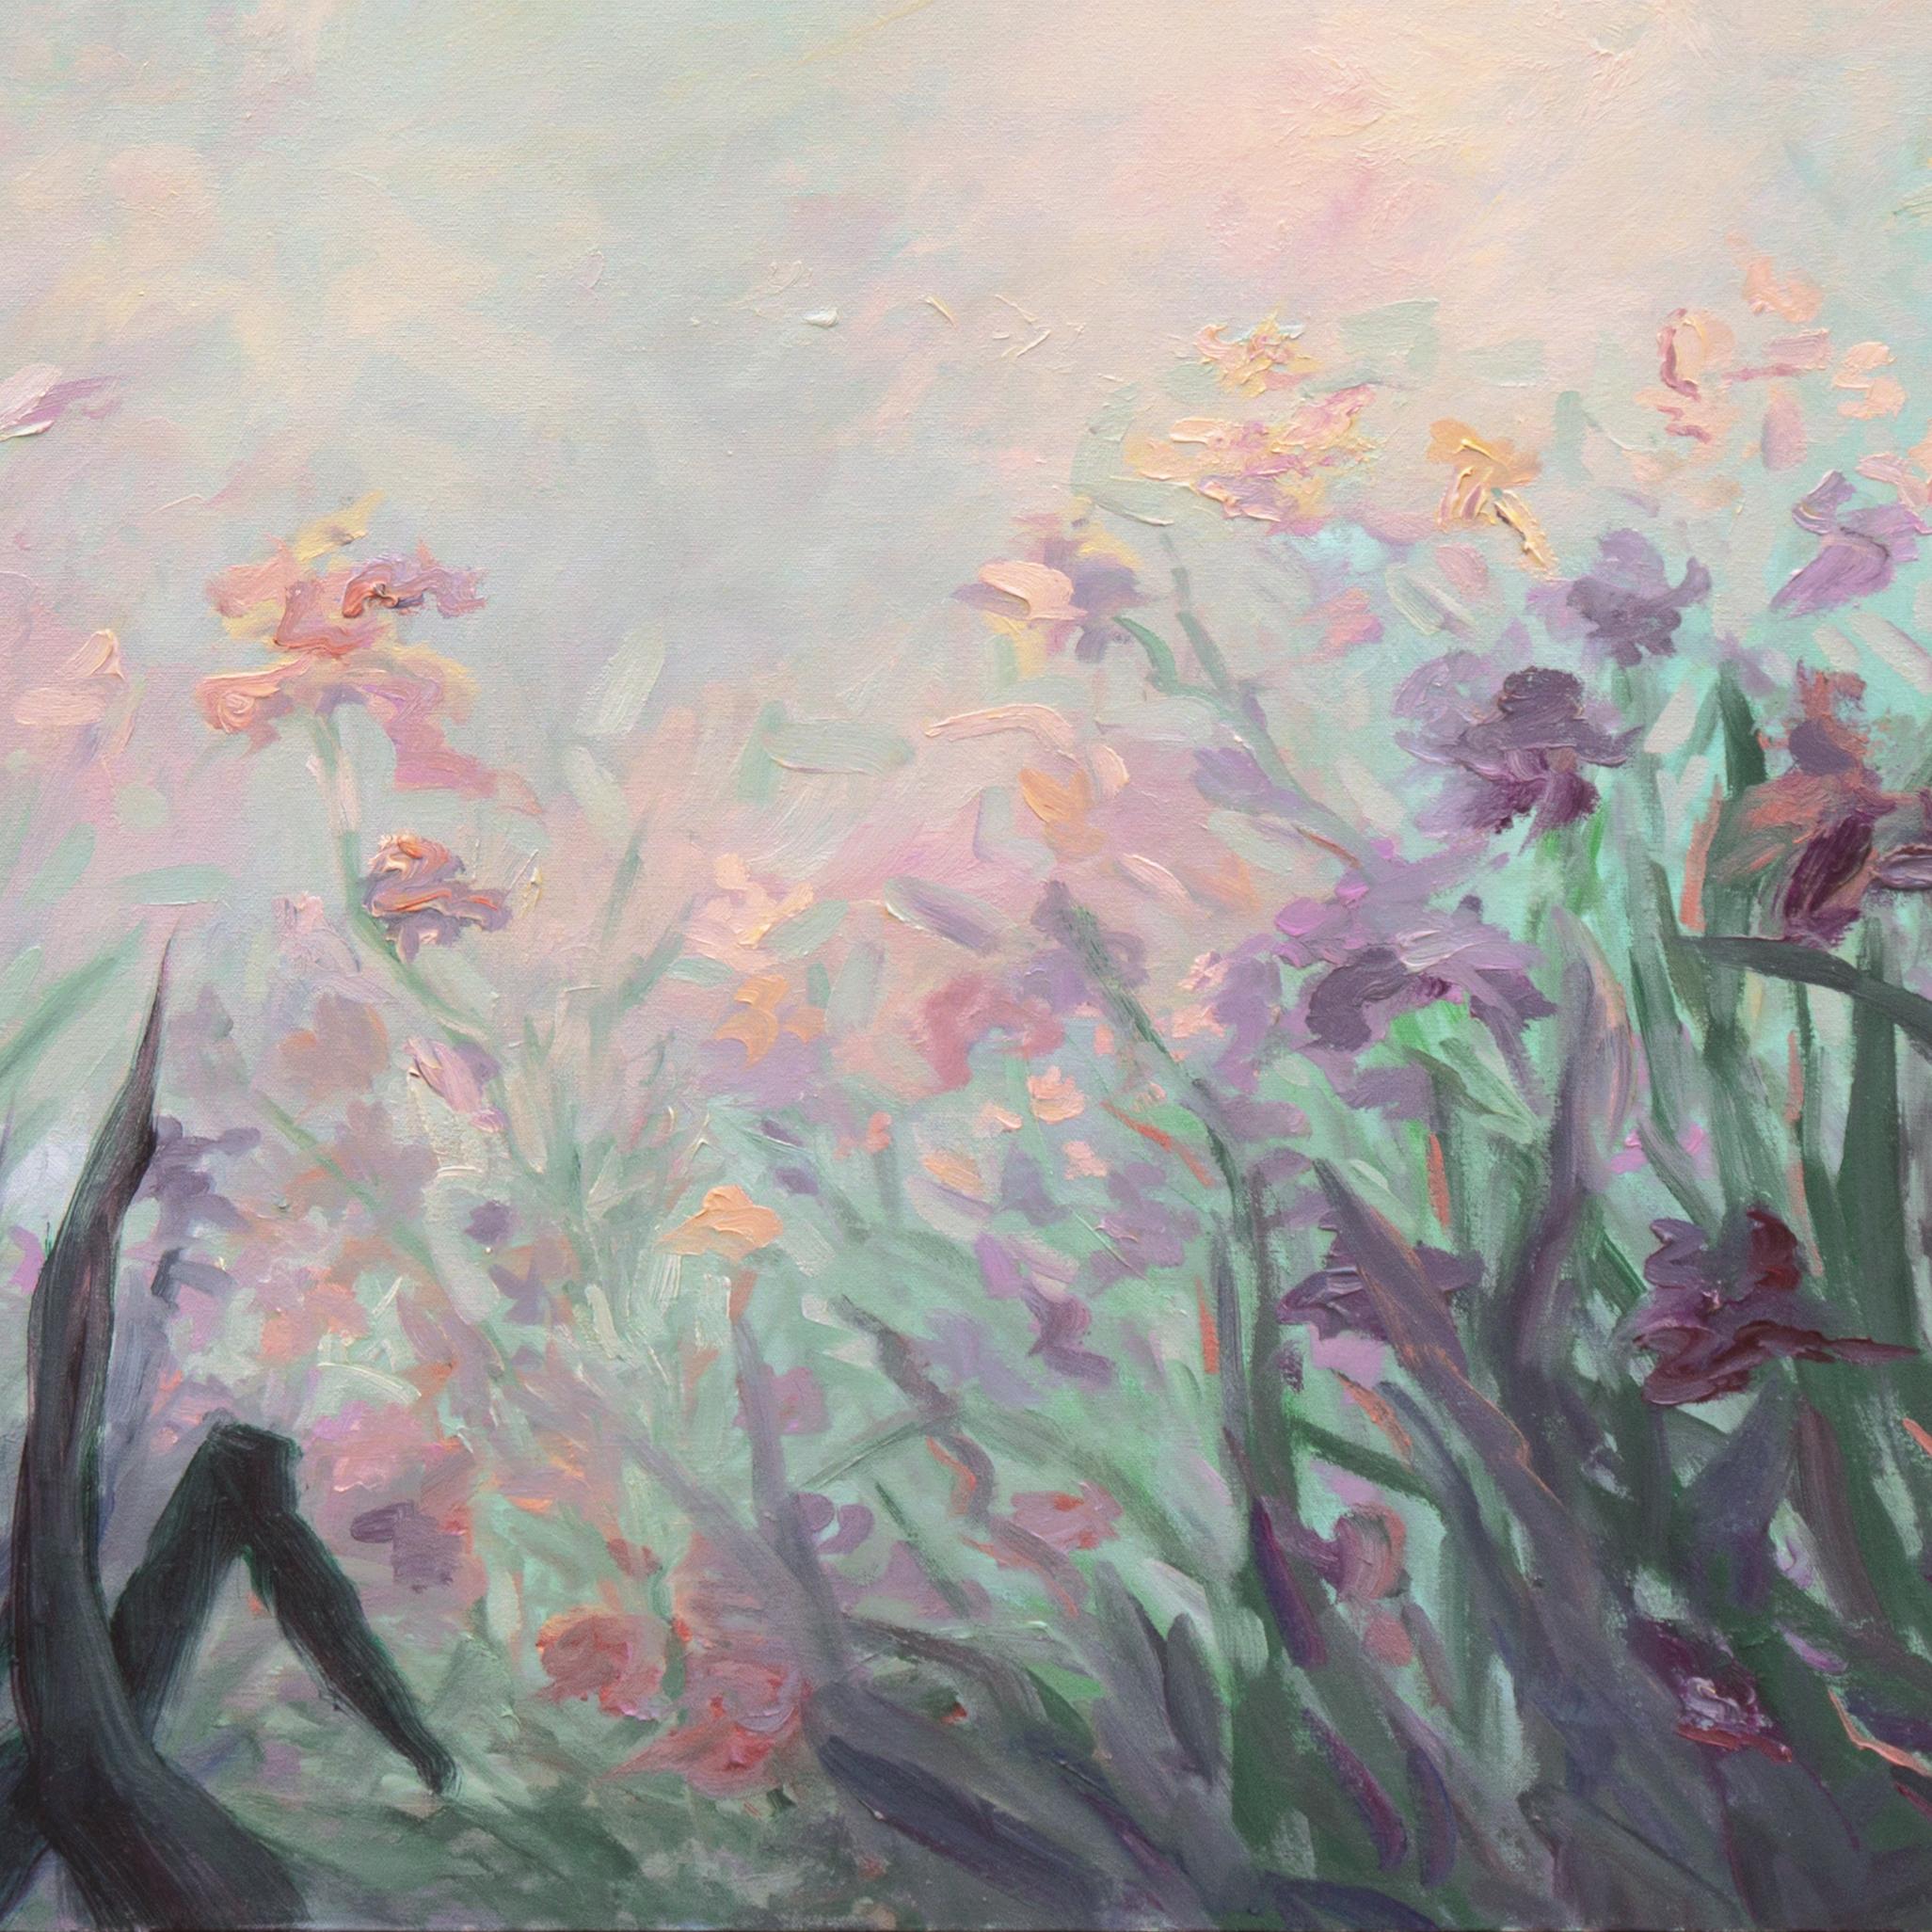  A substantial, Impressionist botanical oil showing a bevy of purple and yellow irises swaying in an evening breeze and silhouetted against a sunset sky. Signed lower right, 'J. C. Baker' (American, 20th century) and dated 1994.